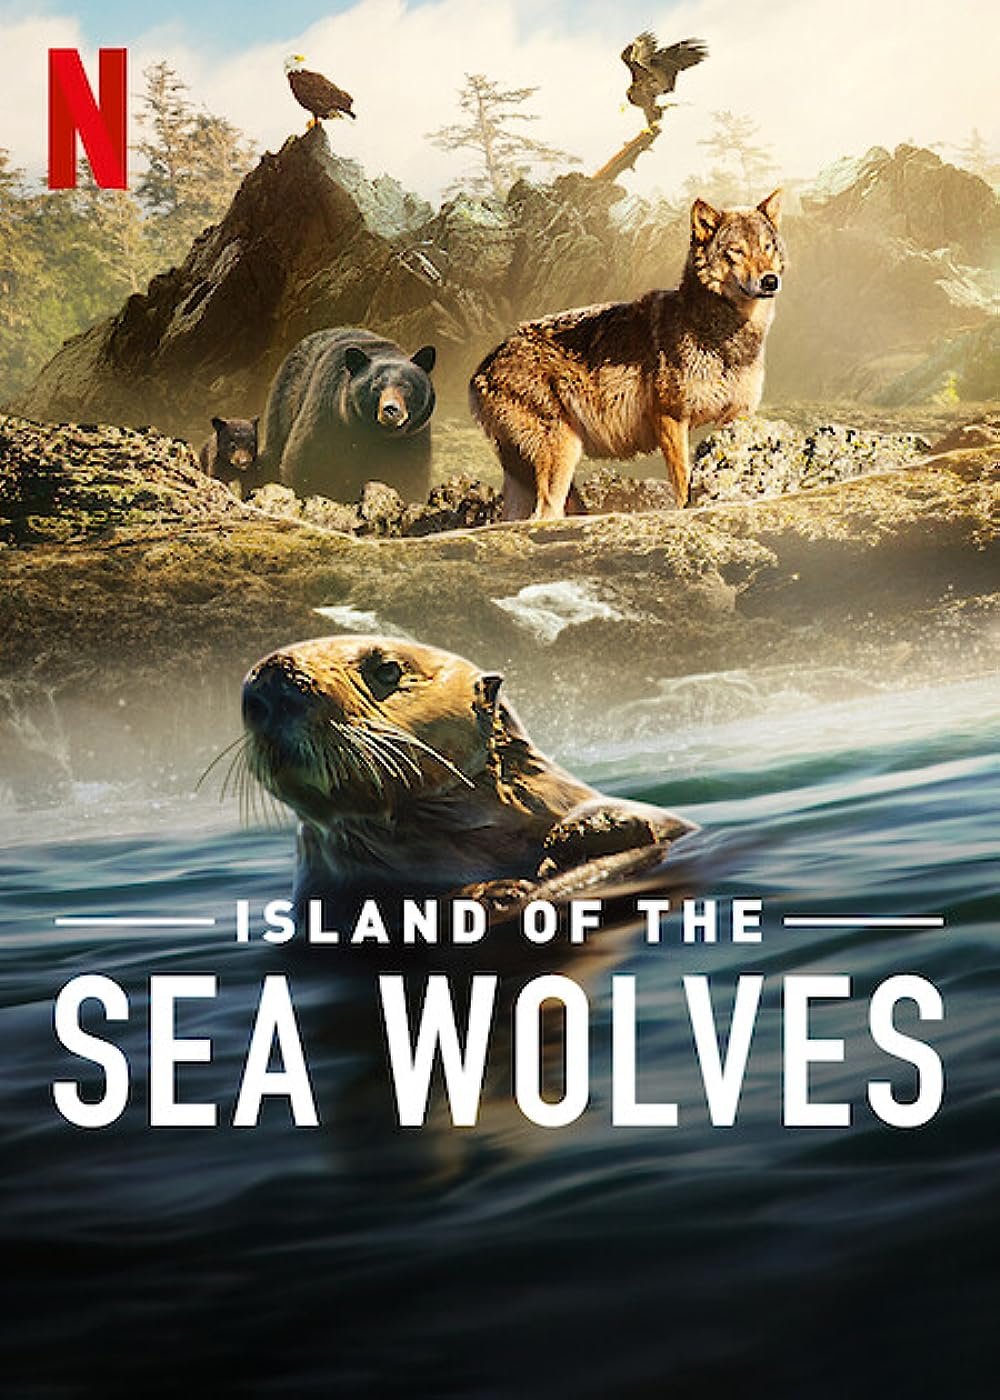 Island of the Sea Wolves (2022) - Score Mixer